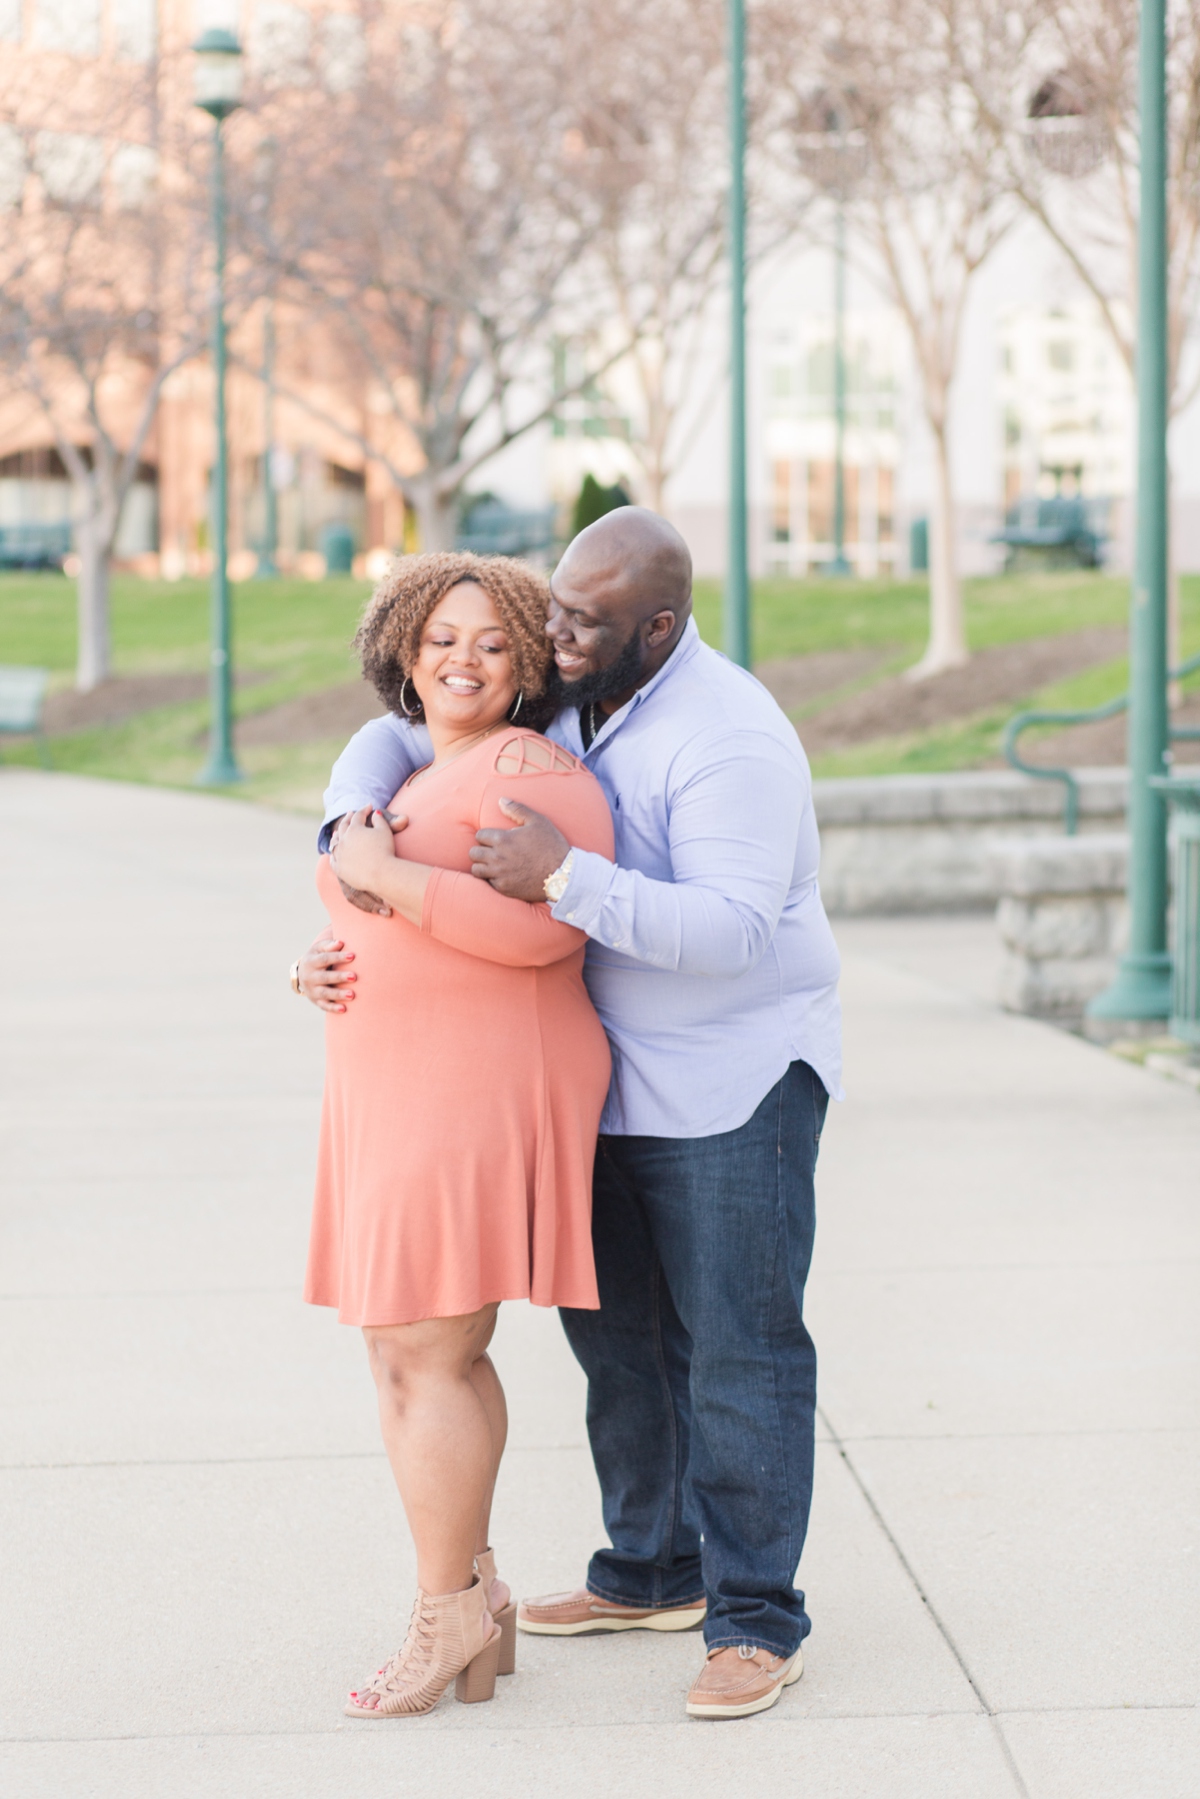 City Center Engagement Photography by Angie McPherson Photography